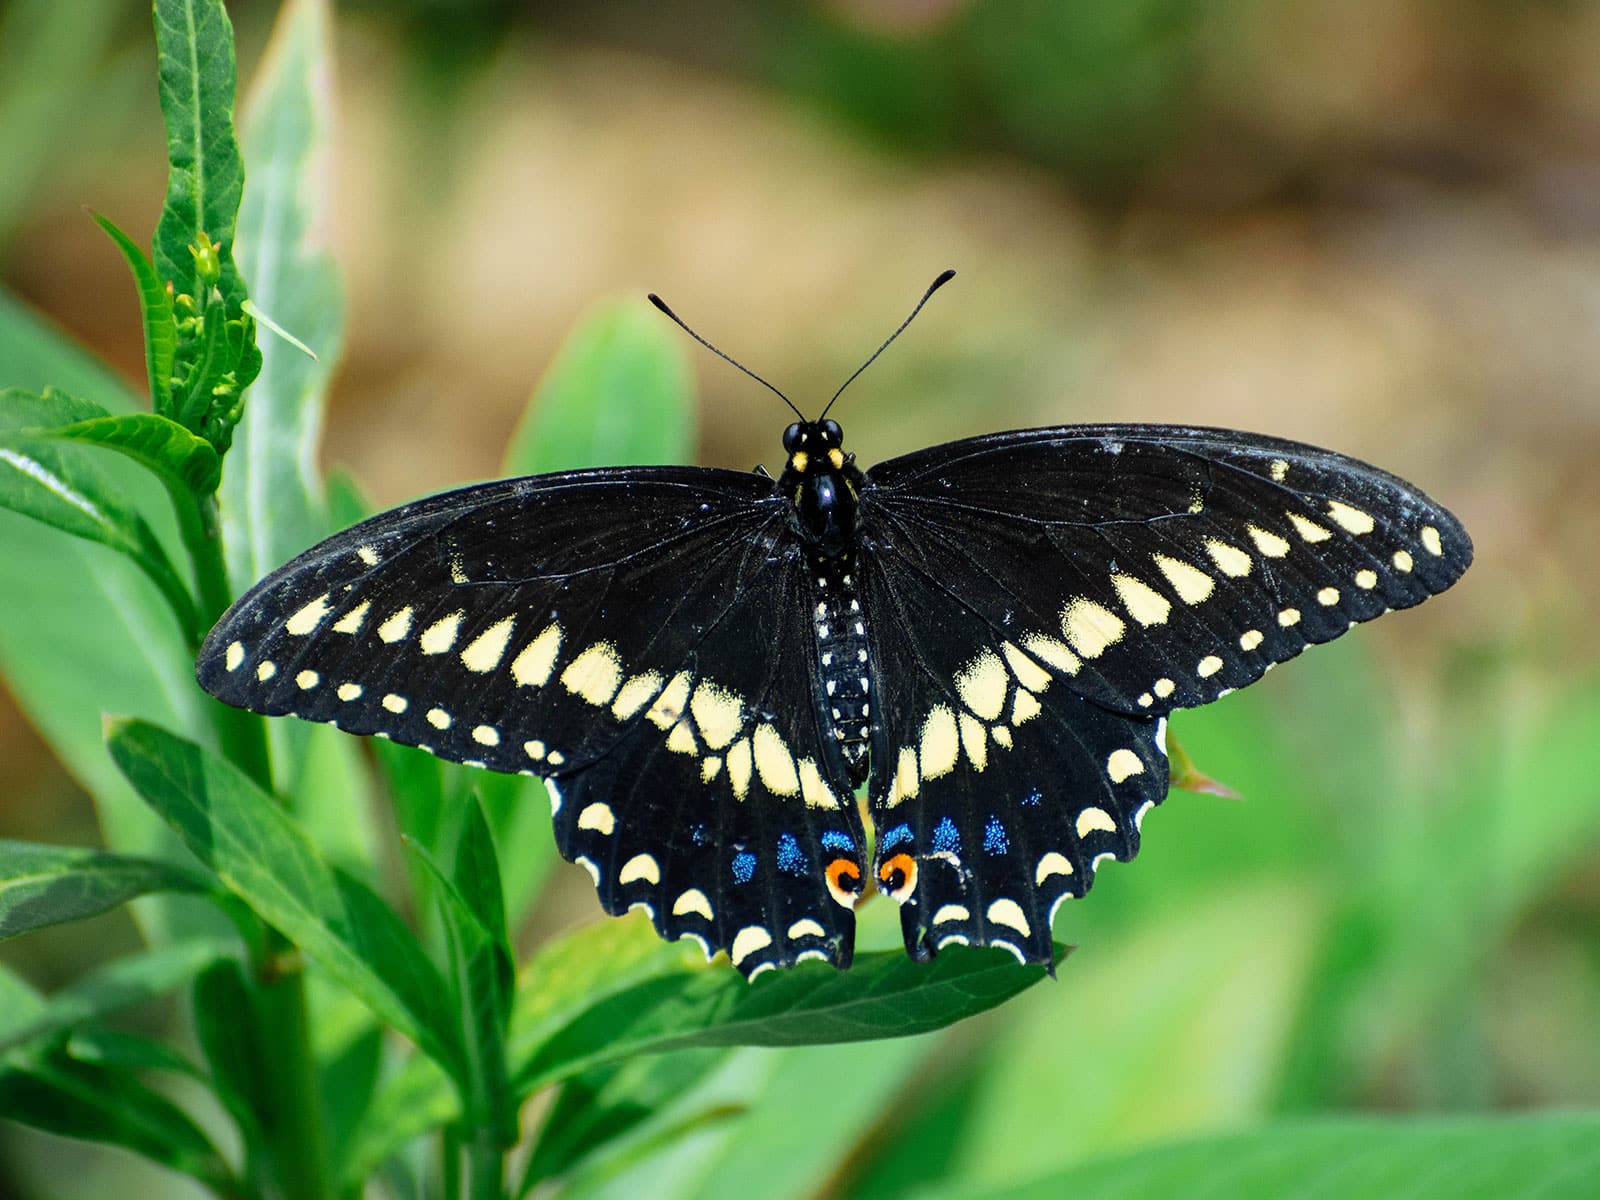 Black swallowtail butterfly on a green plant